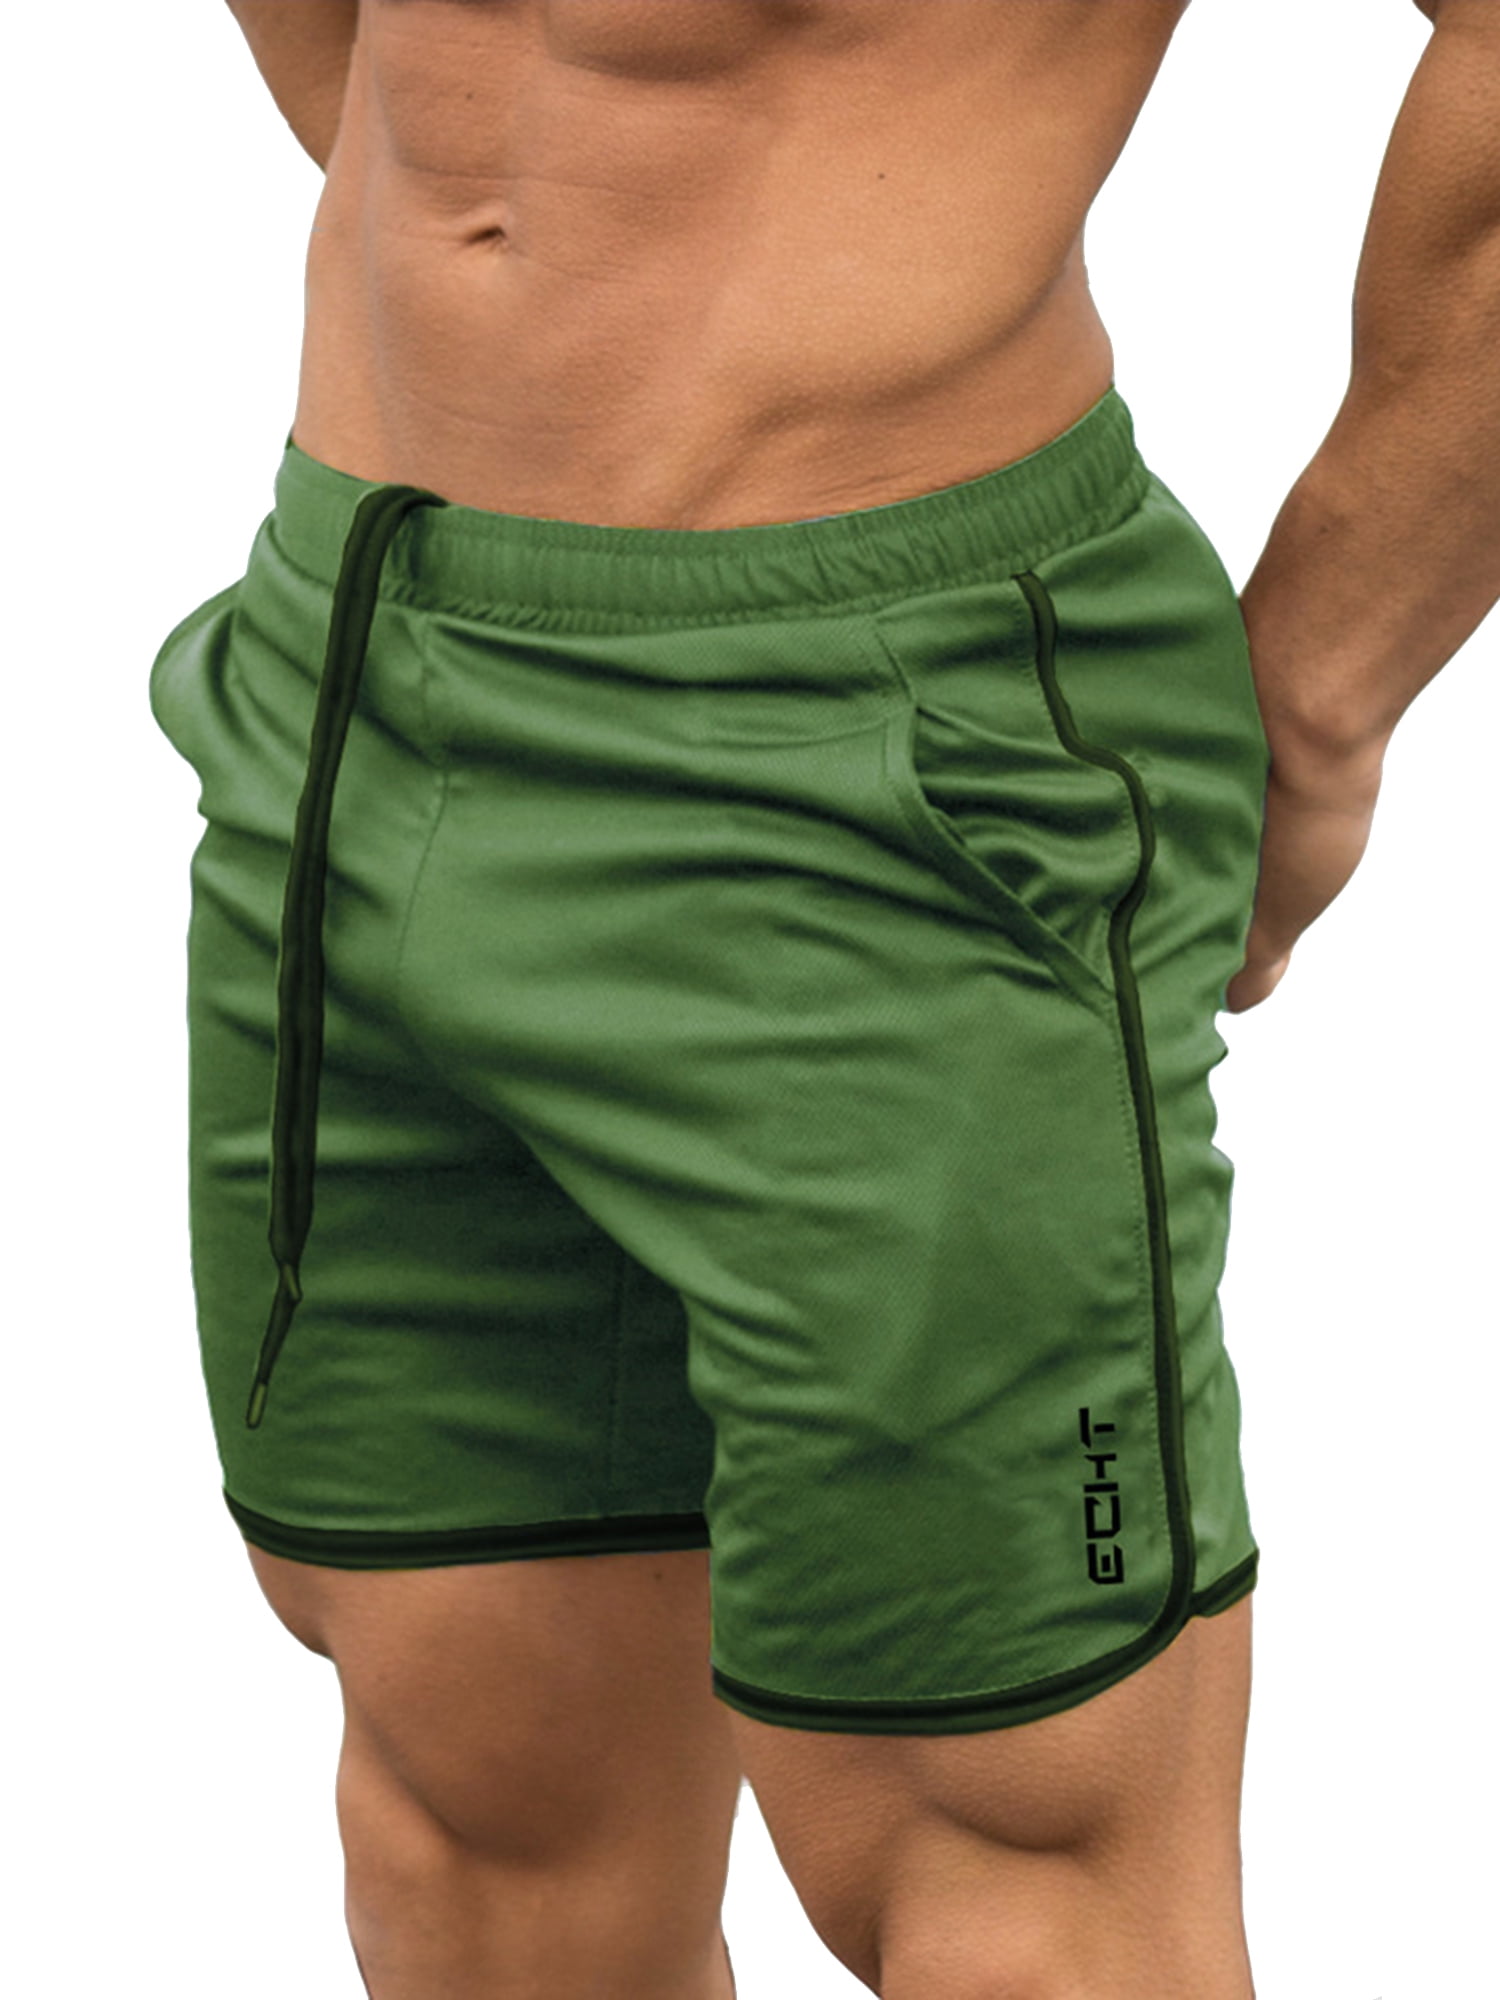 Hommes Sport Football Short Gym Course Fitness Sport Summer Cool Casual Active 